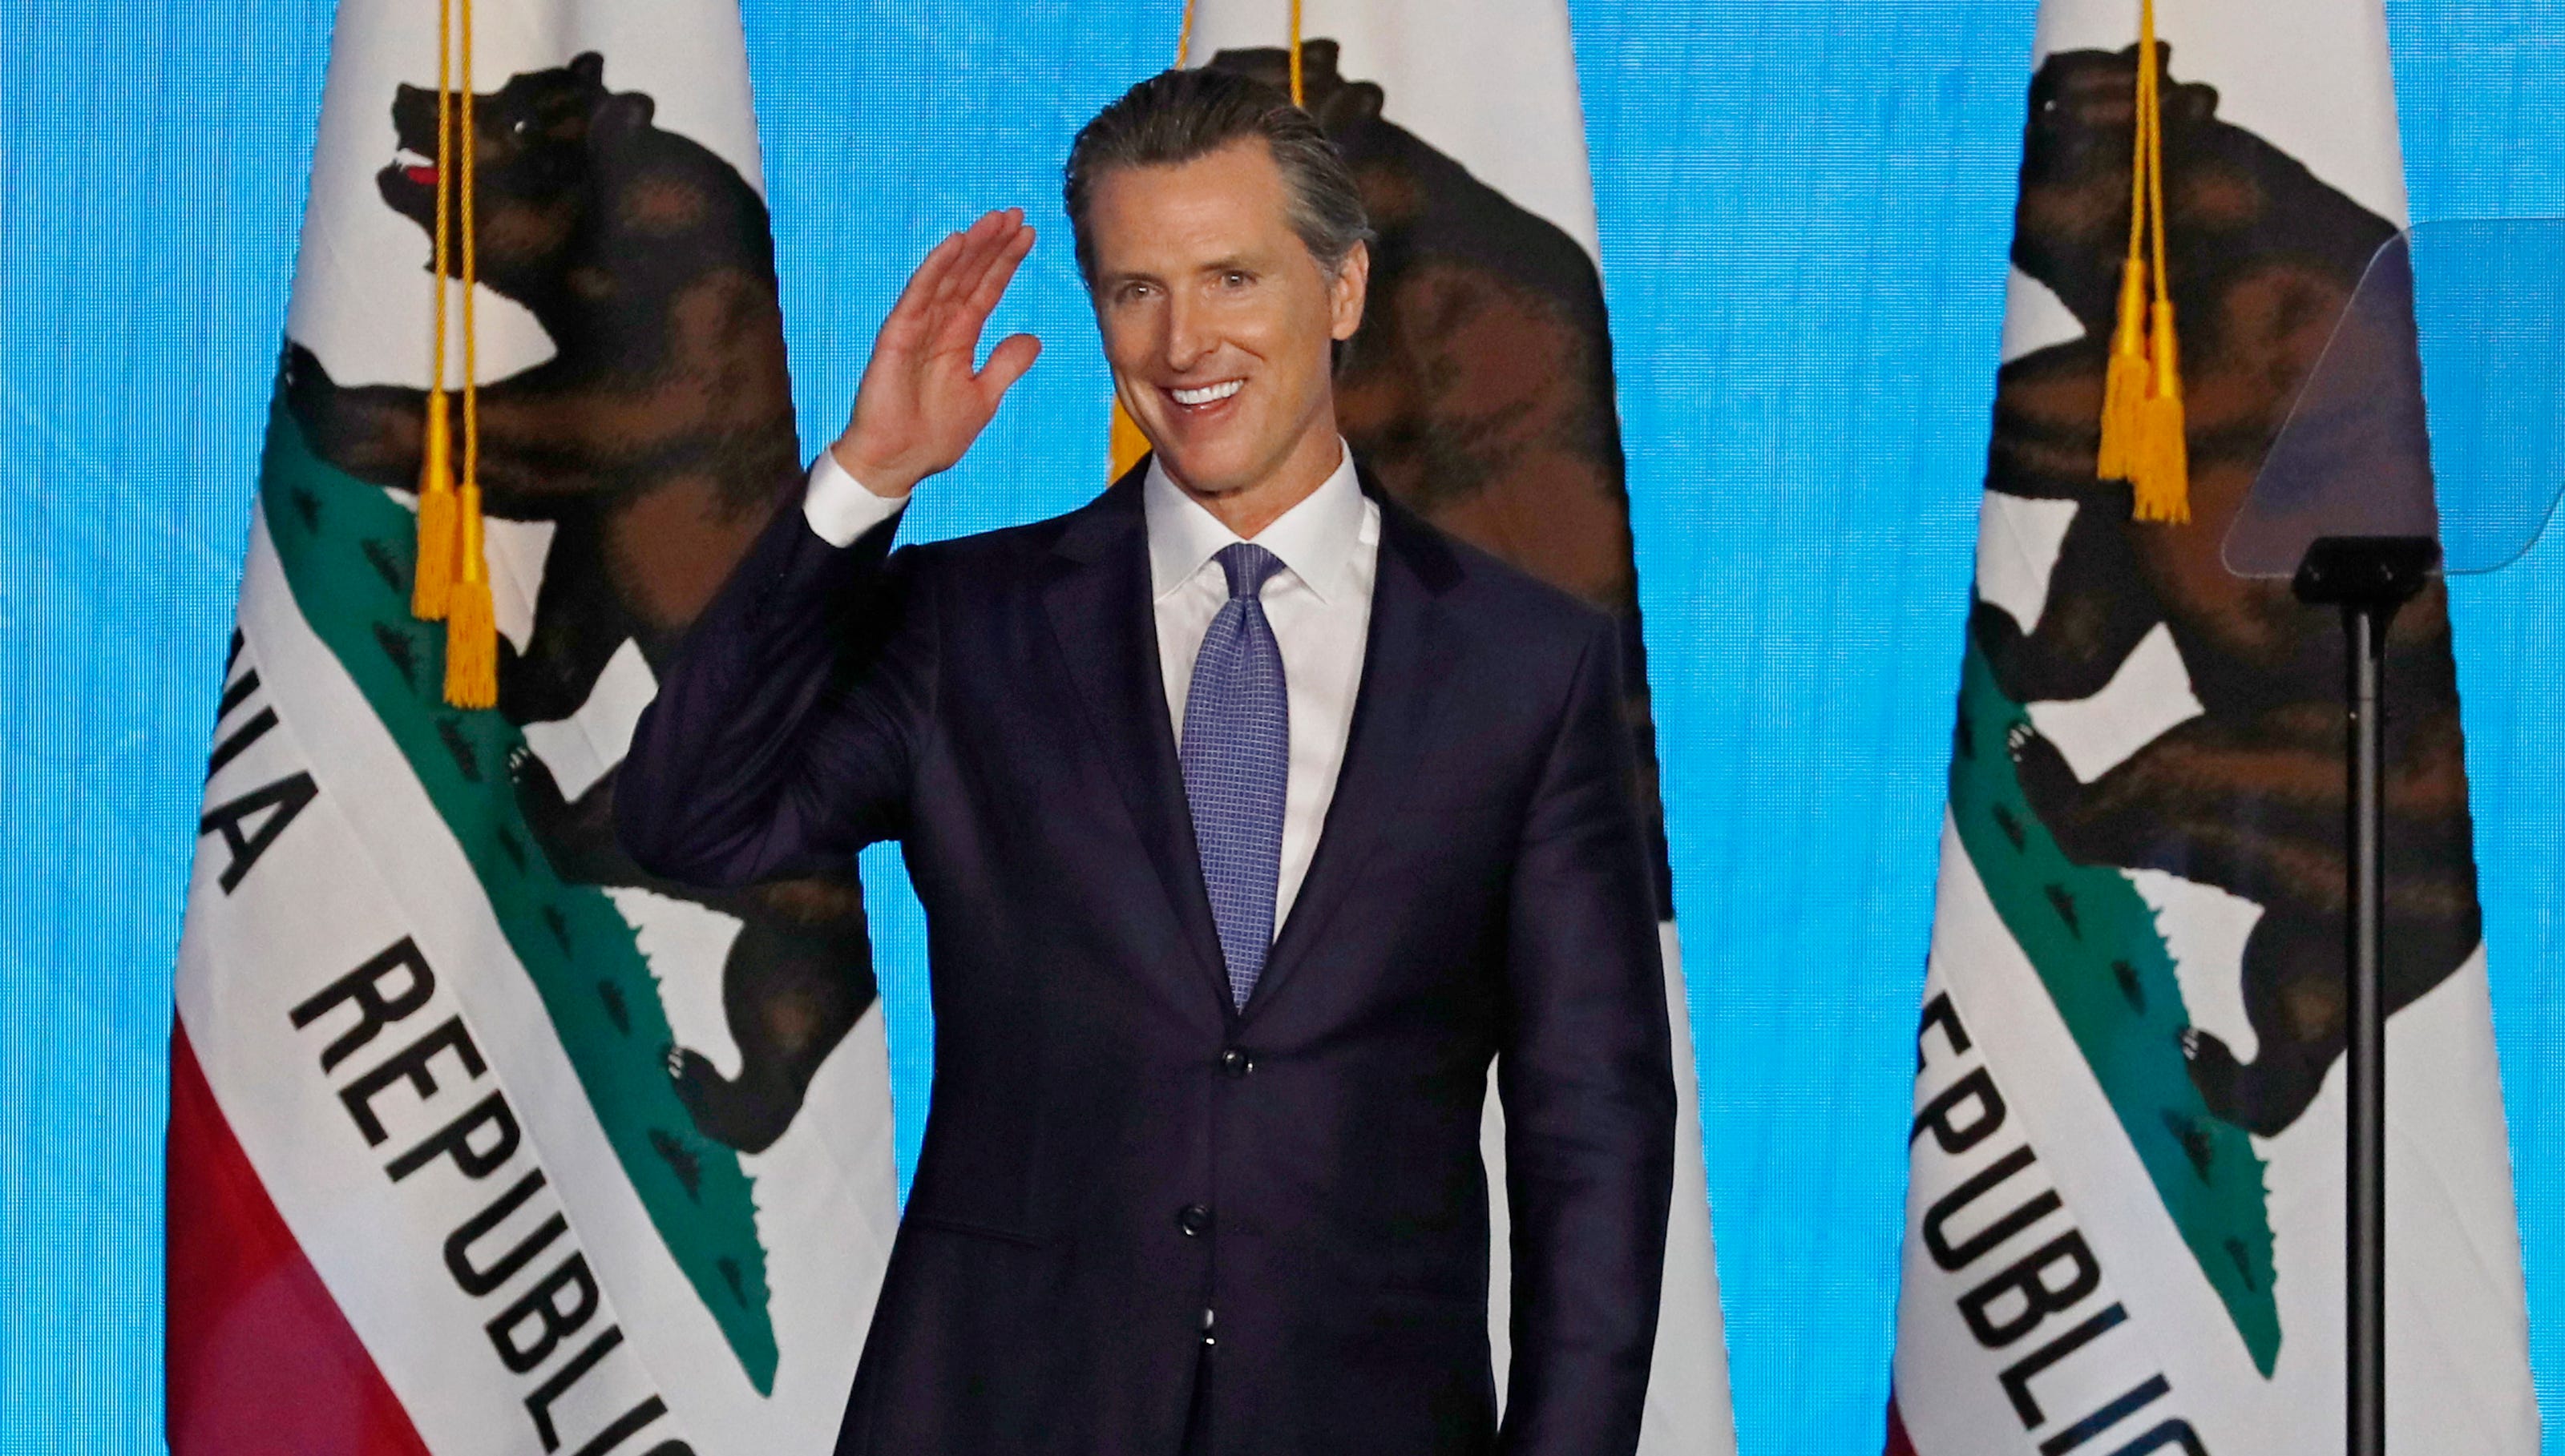 As Trump battles California, Newsom makes big changes in first 100 days